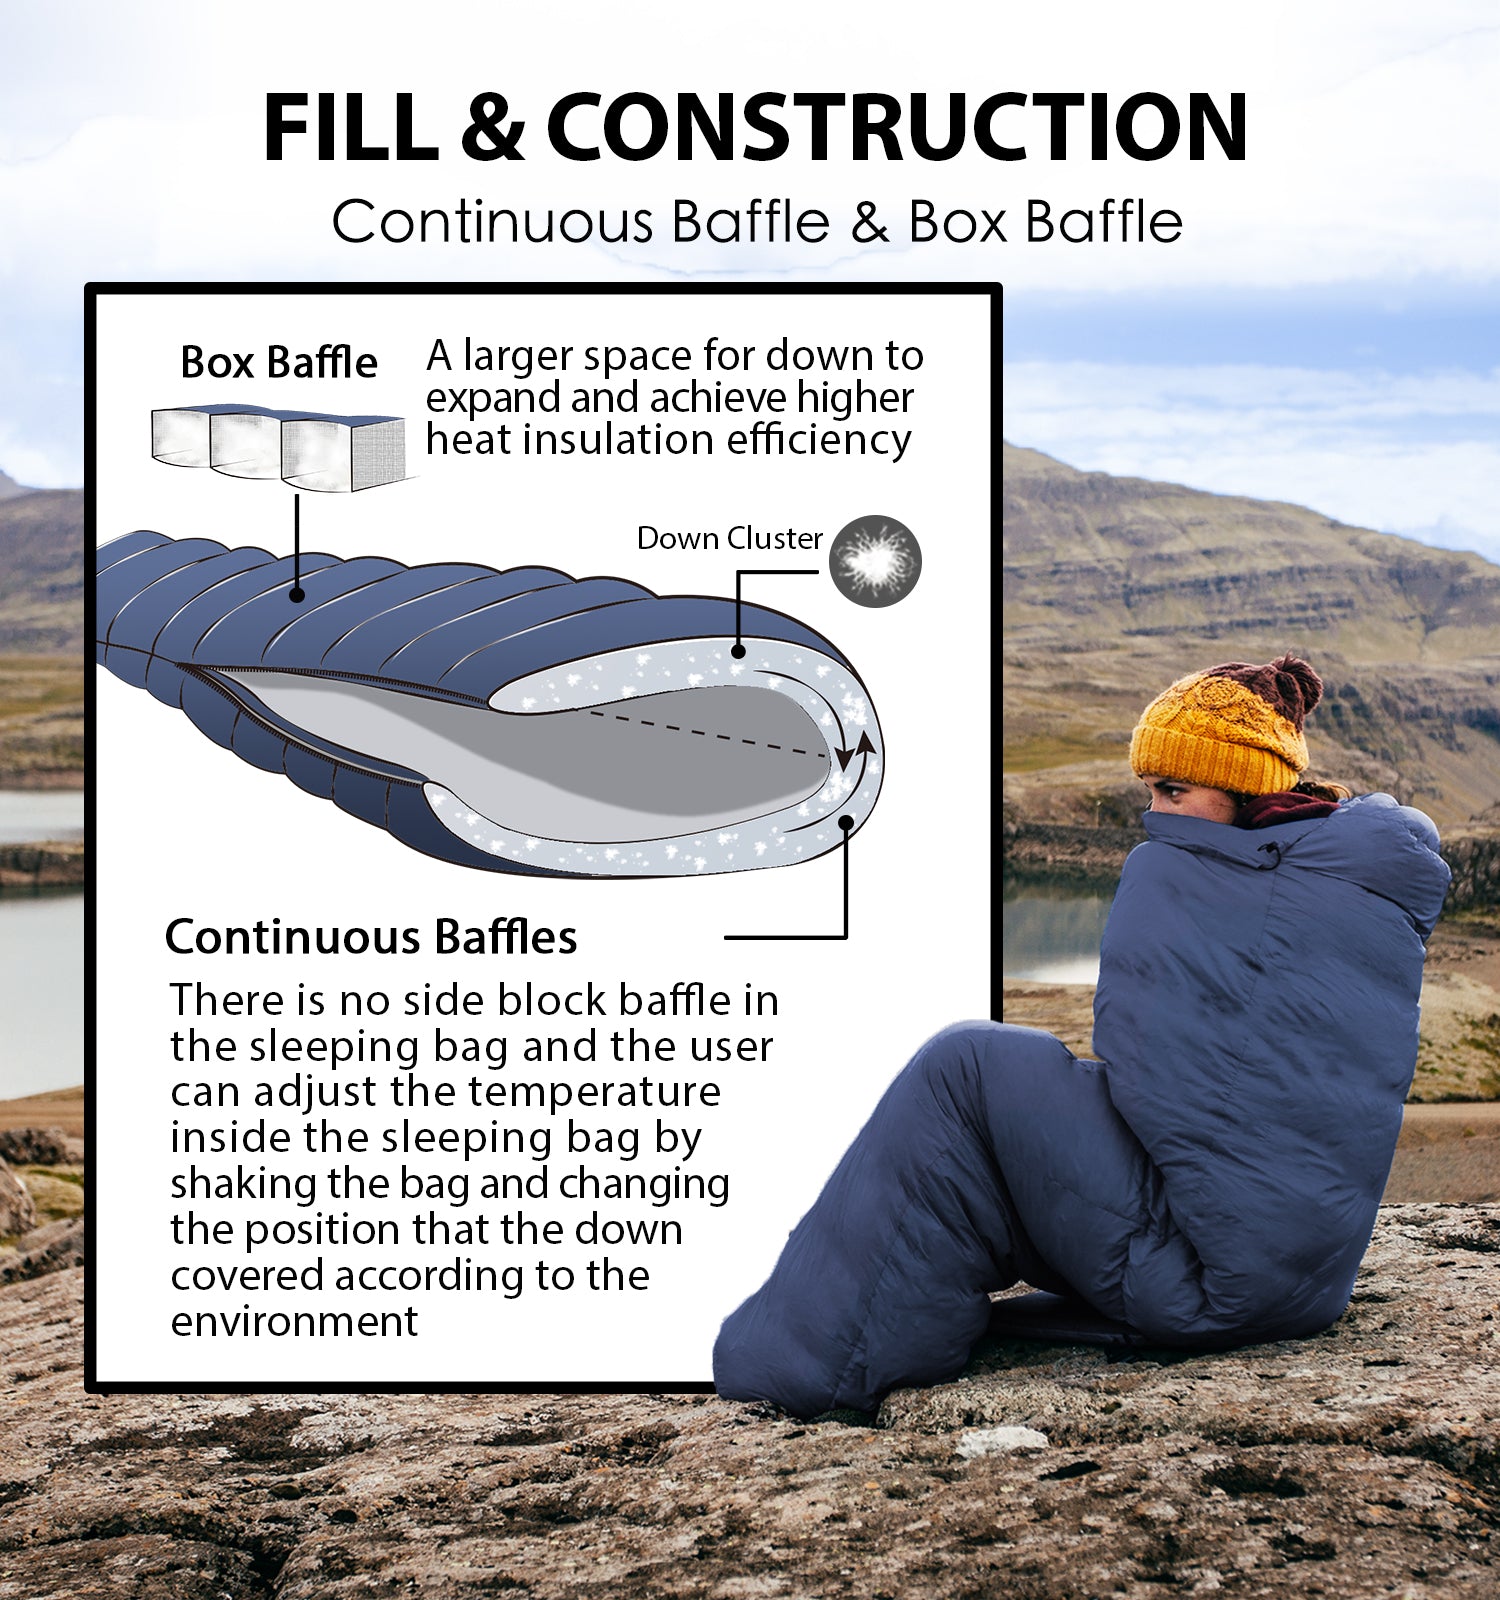 continuous baffle box baffle sleeping bag insulation C2101 1.1 lbs 500g 700 Fill Power Down Ultra Air Mummy Sleeping Bag 43-68F 6-20C Litume small size ultra air lightweight compact packabale compressible backpacking hiking outdoor camping summer travel hostal train car auto road trip summer